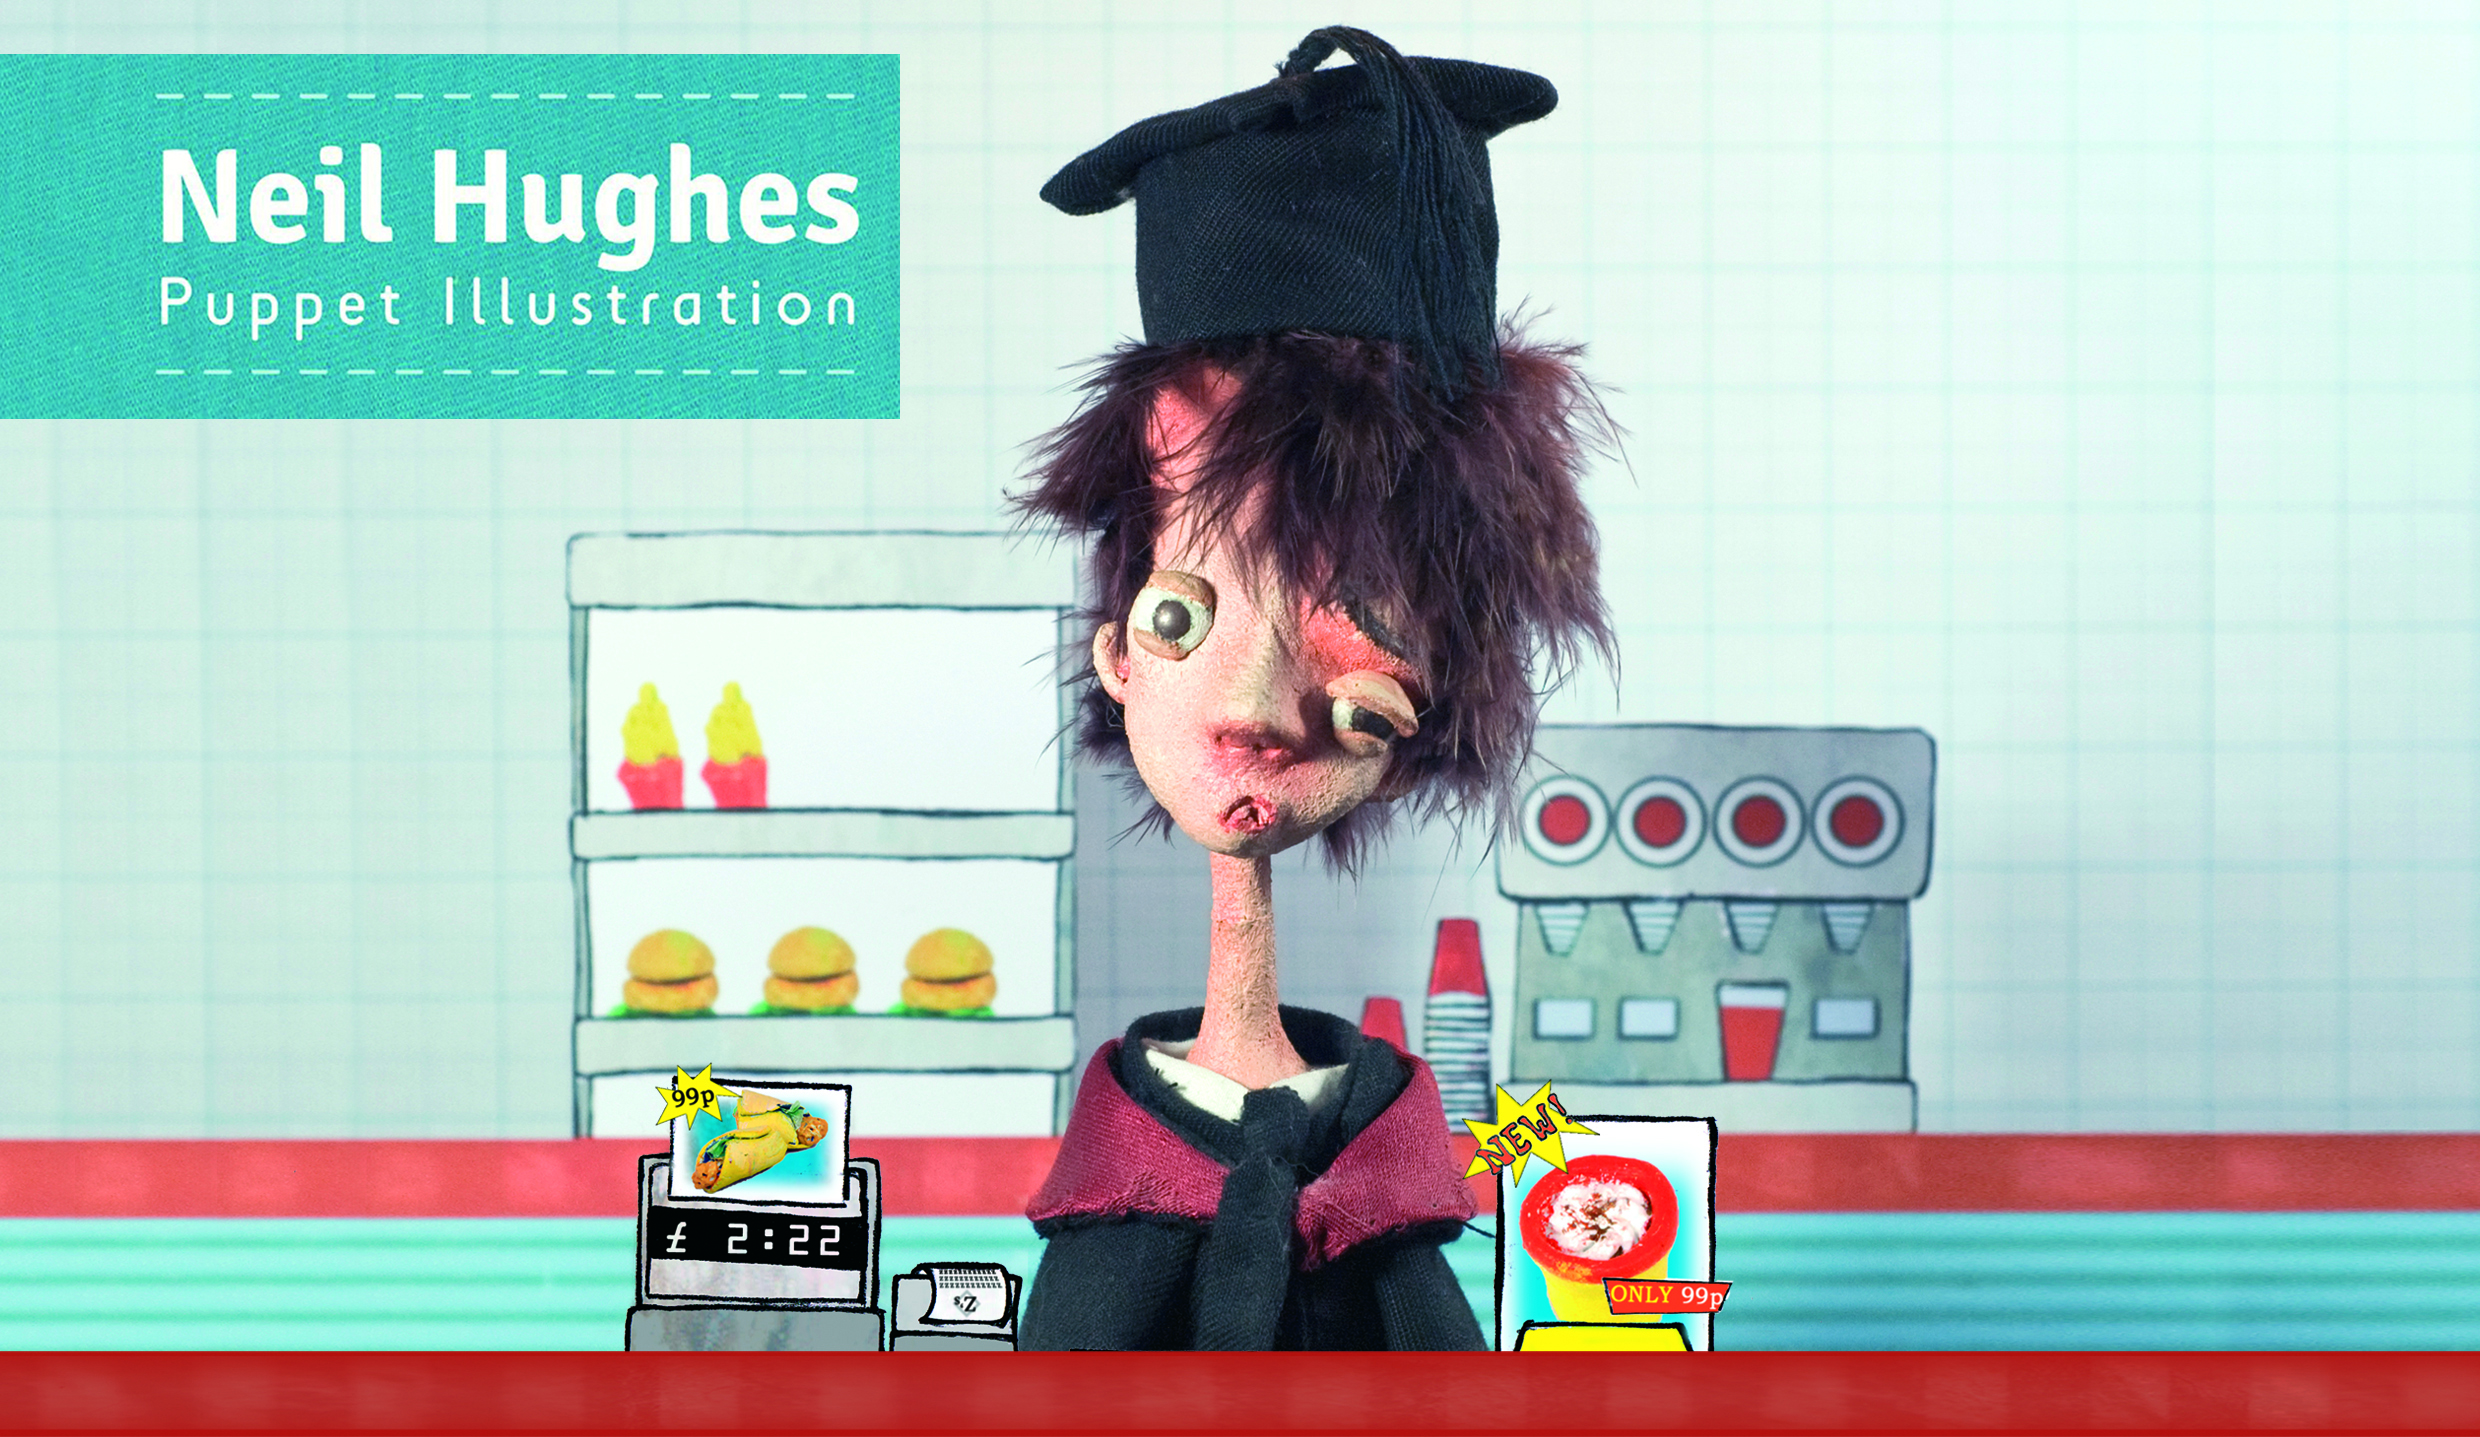 Neil Hughes Puppet Illustration | About me